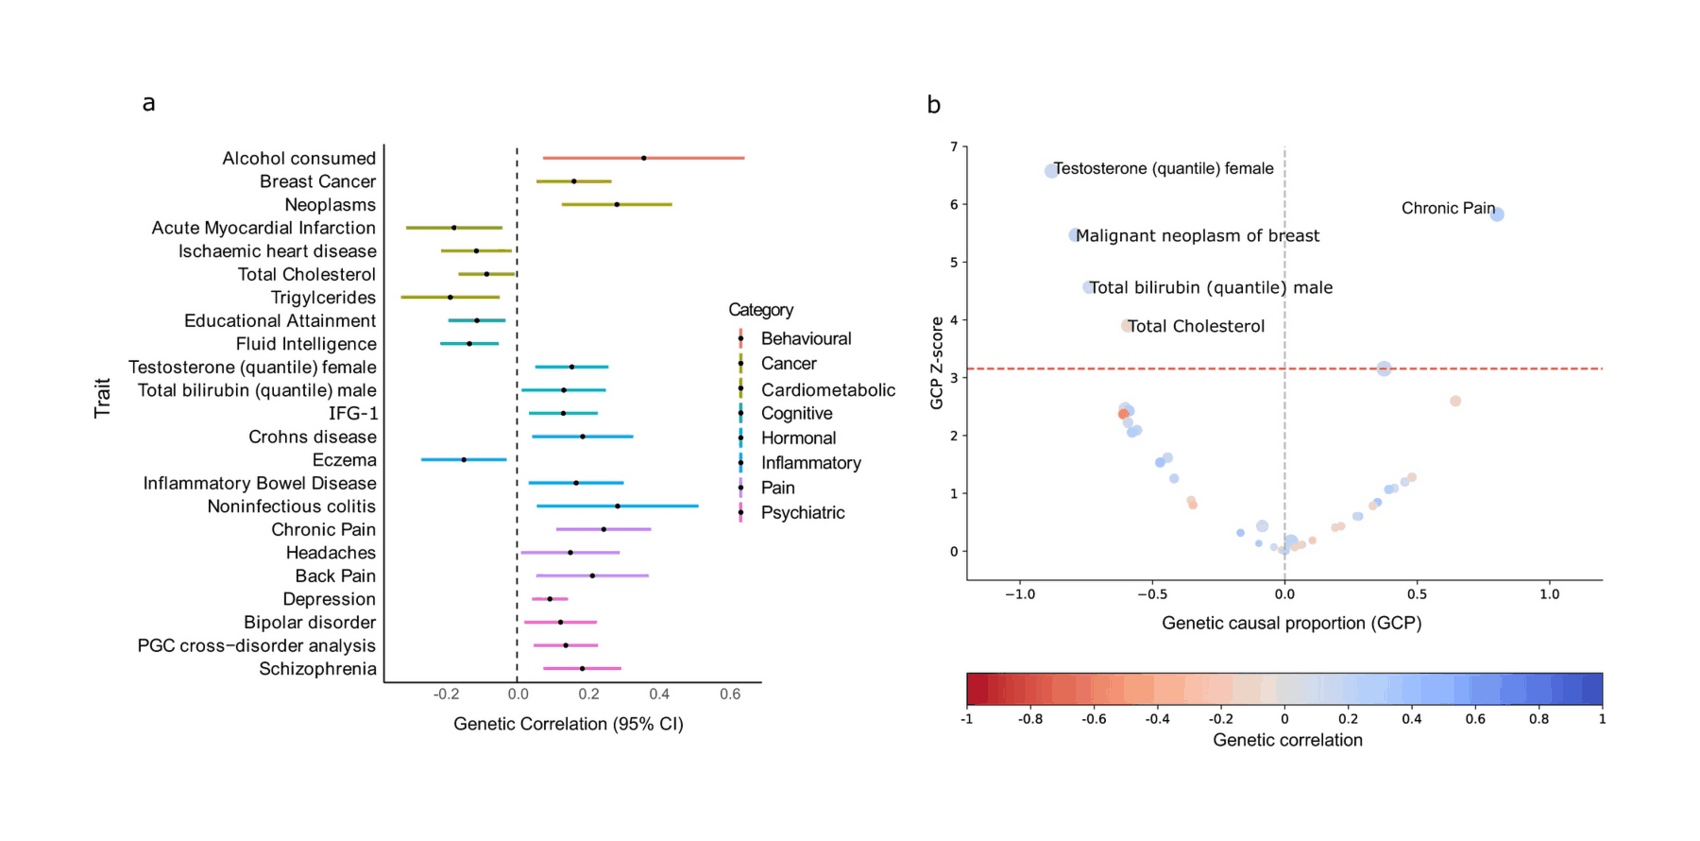 Figure 2: Genetic correlation and latent causal variable analysis between acne and other complex traits. All analyses were conducted using GWAS summary statistic data from 935 complex traits in the CTG-VL platform. (a) Black circles represent point estimates of LD score-based genetic correlations. Error bars indicate 95% confidence intervals. (b) Color bar indicates strength and direction of genetic correlation where red indicates a negative correlation and blue a positive correlation. Red line indicates statistical-significance threshold for multiple testing (FDR < 5%). CI: confidence intervals, GCP: Genetic causal proportion.